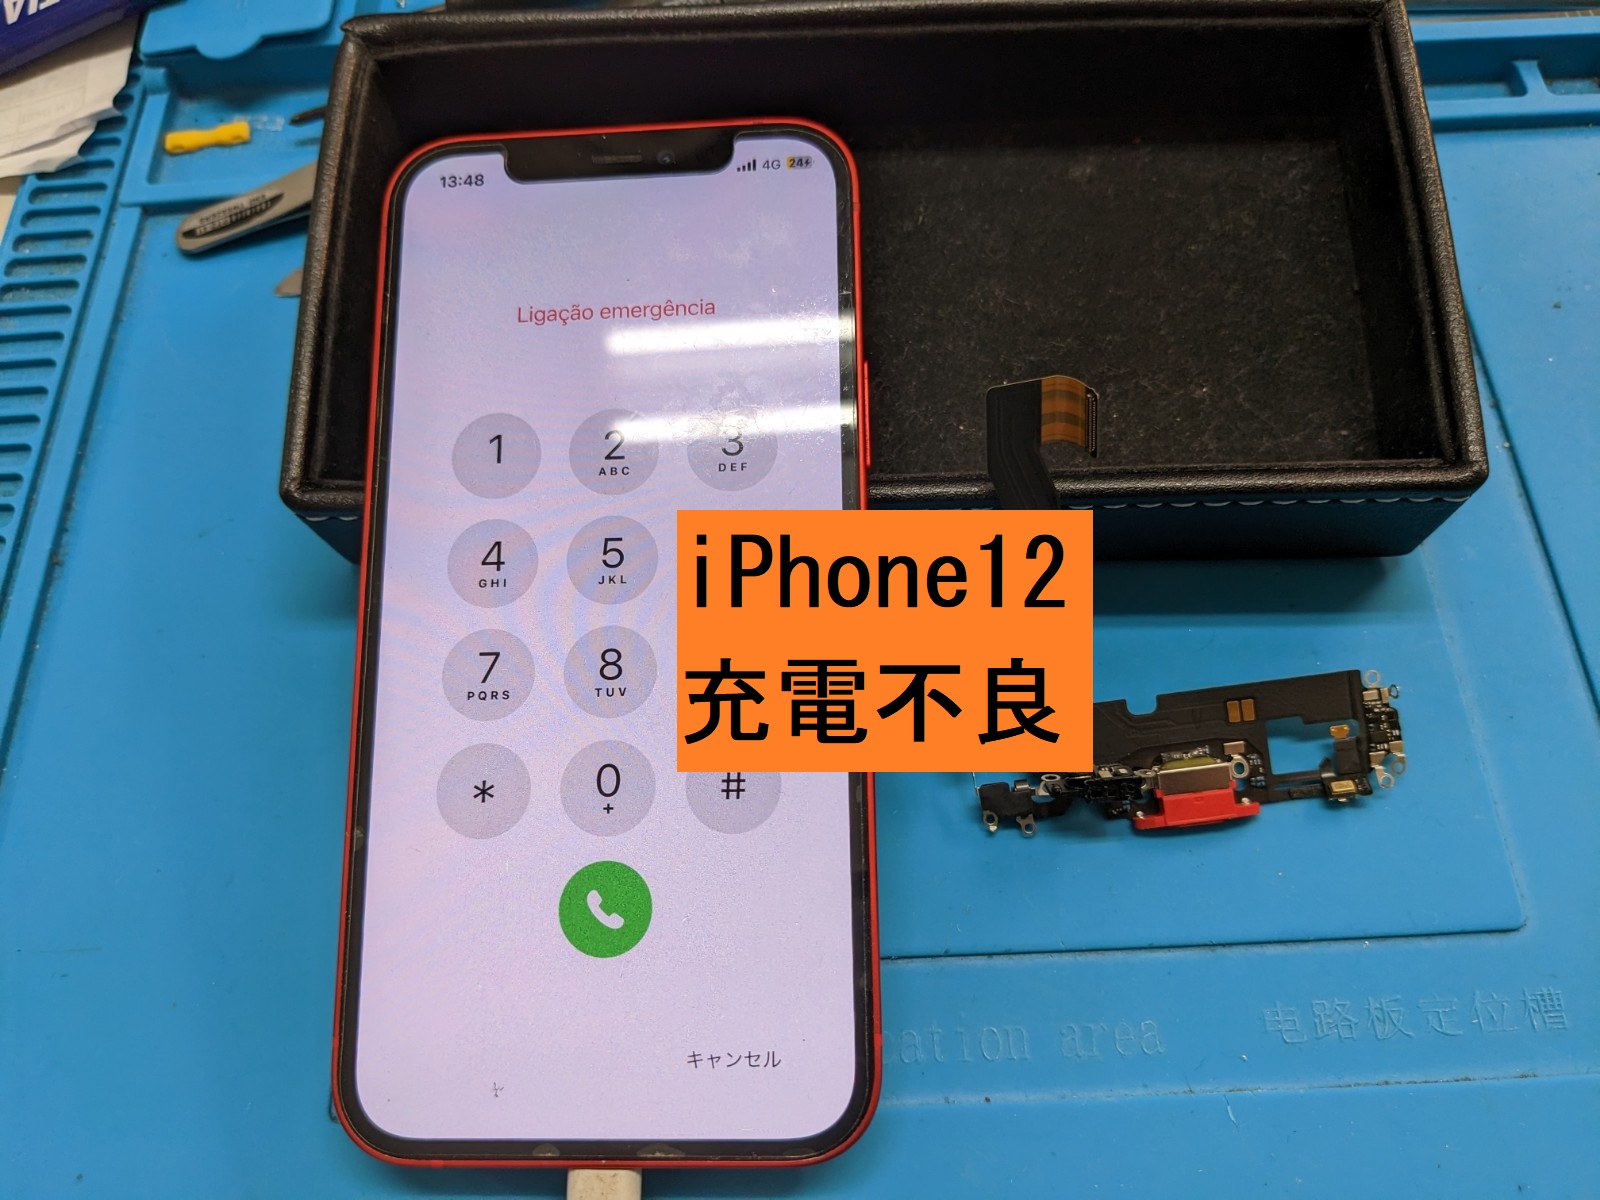 iPhone12の充電不良で名古屋よりお越しのお客様！【名古屋】